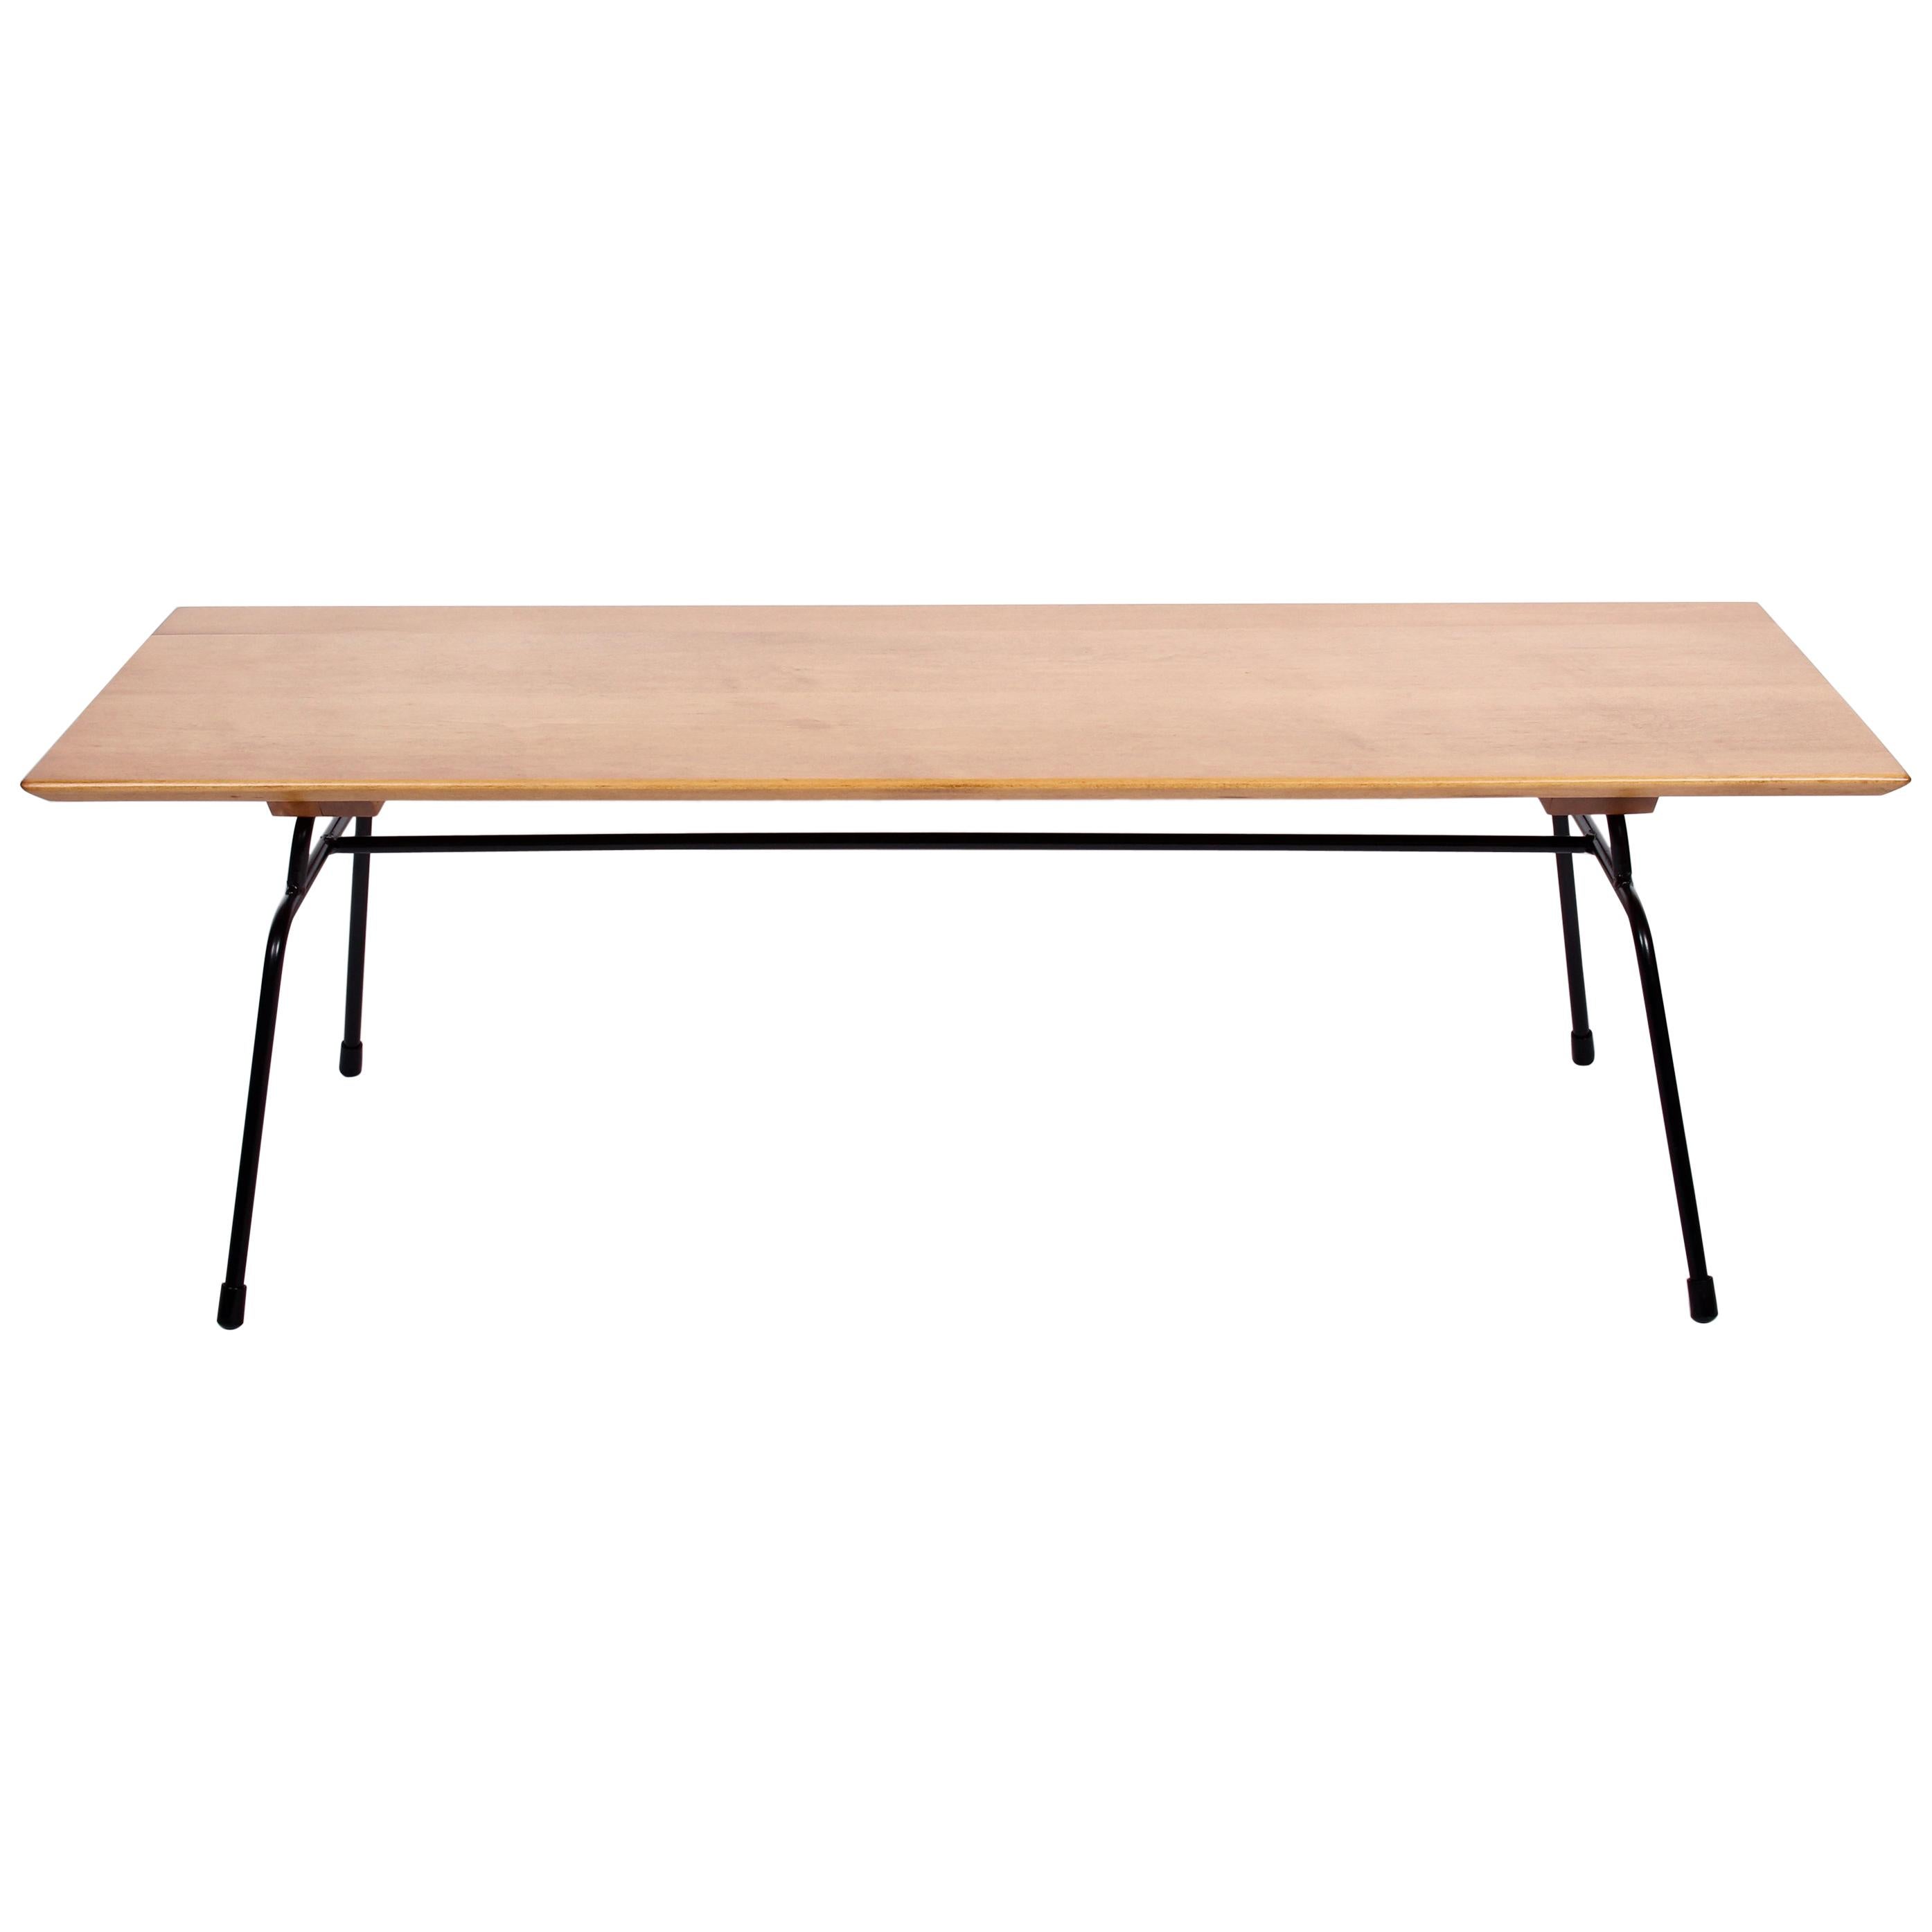 Paul McCobb Planner Group for Winchendon birch and black iron coffee table. Featuring a sturdy rectangular open Iron framework detailed with capped feet and four foot solid birch surface. Classic. Timeless. Fine design.